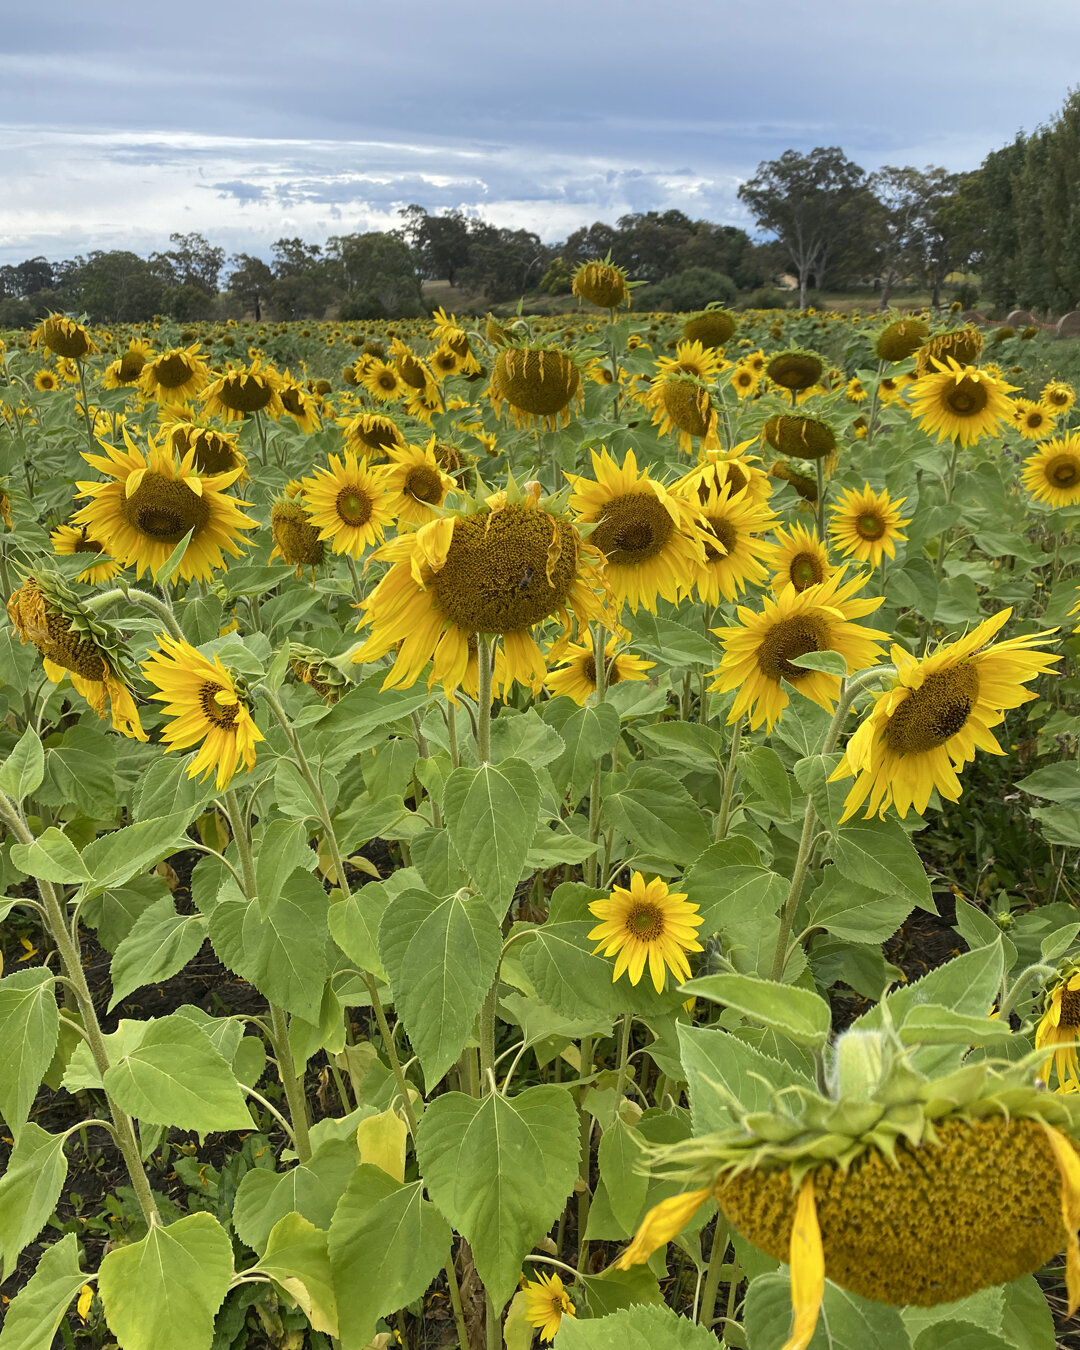 🌻The farm has been open for this summer for just over 2 weeks now. It's almost time to close for the season but we are opening for a few final sessions for you to walk amongst the flowers at the farm. 

📍Important heads-up: The sunflowers have been